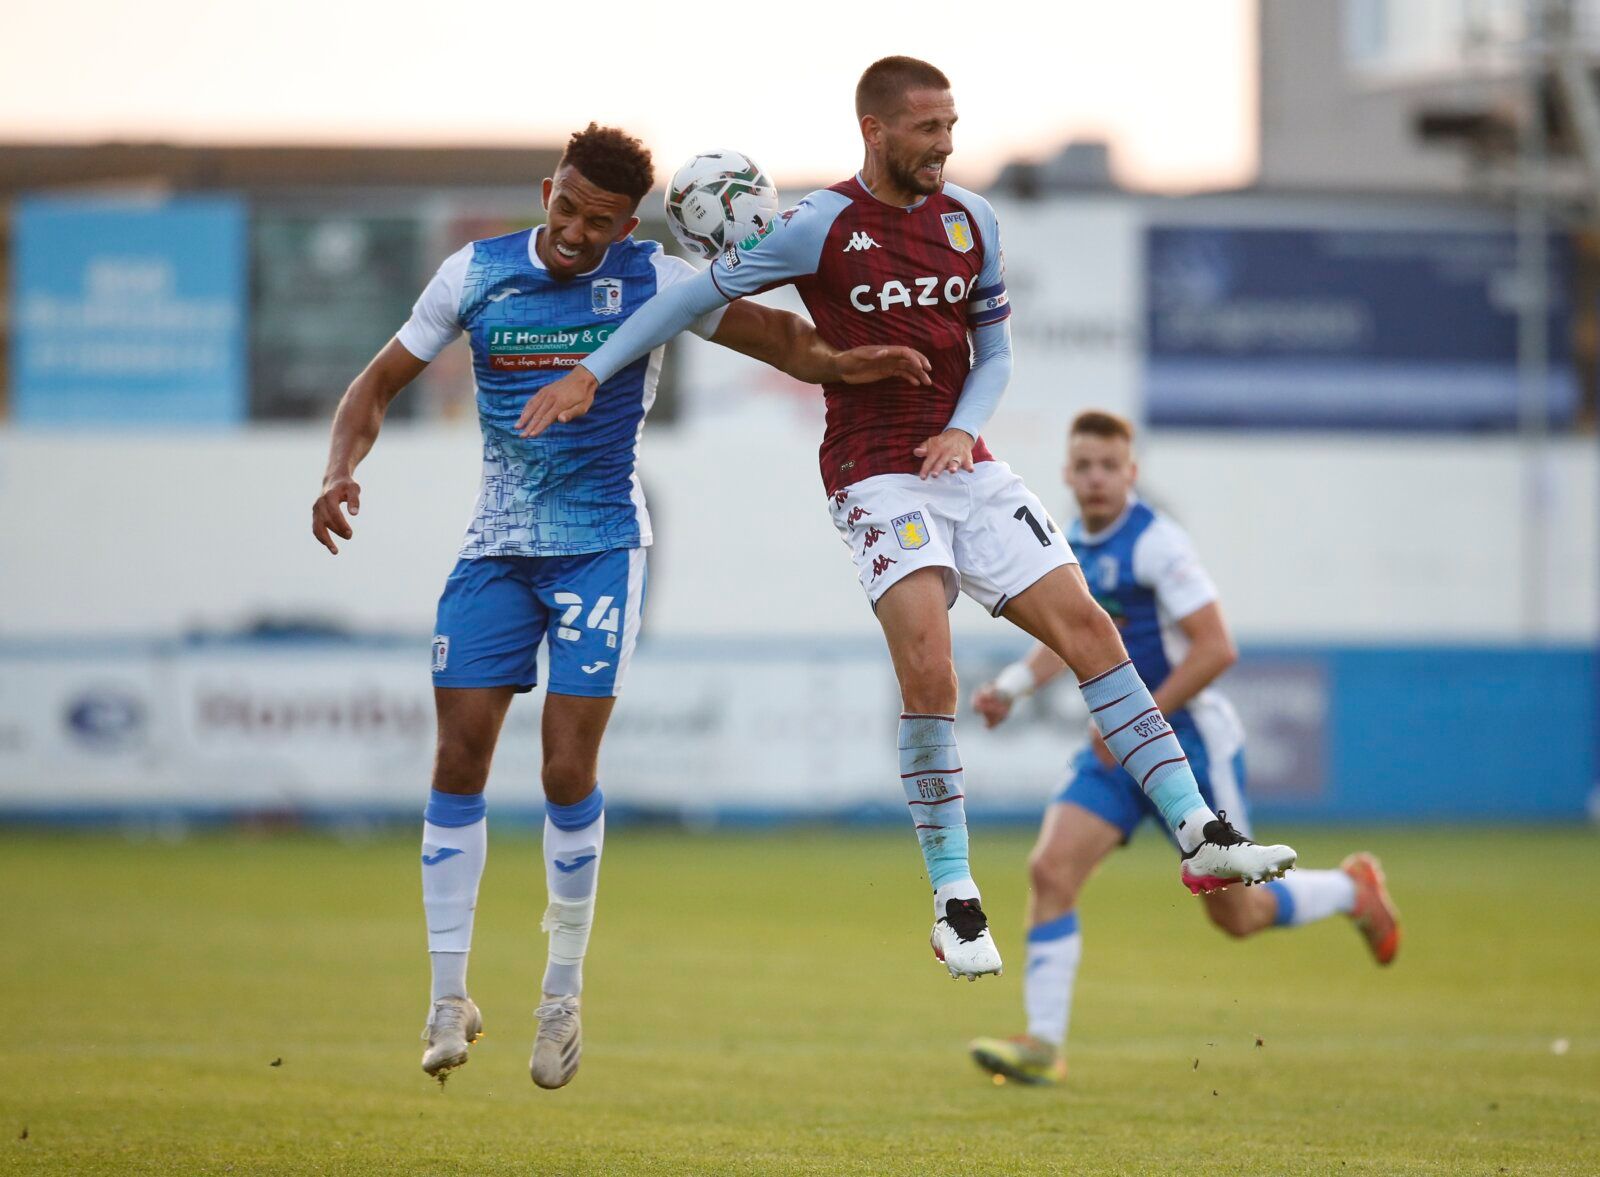 Soccer - England - Carabao Cup Second Round - Barrow v Aston Villa - Holker Street, Barrow-in-Furness, Britain - August 24, 2021 Barrow's Remeao Hutton in action with Aston Villa's Conor Hourihane Action Images via Reuters/Ed Sykes